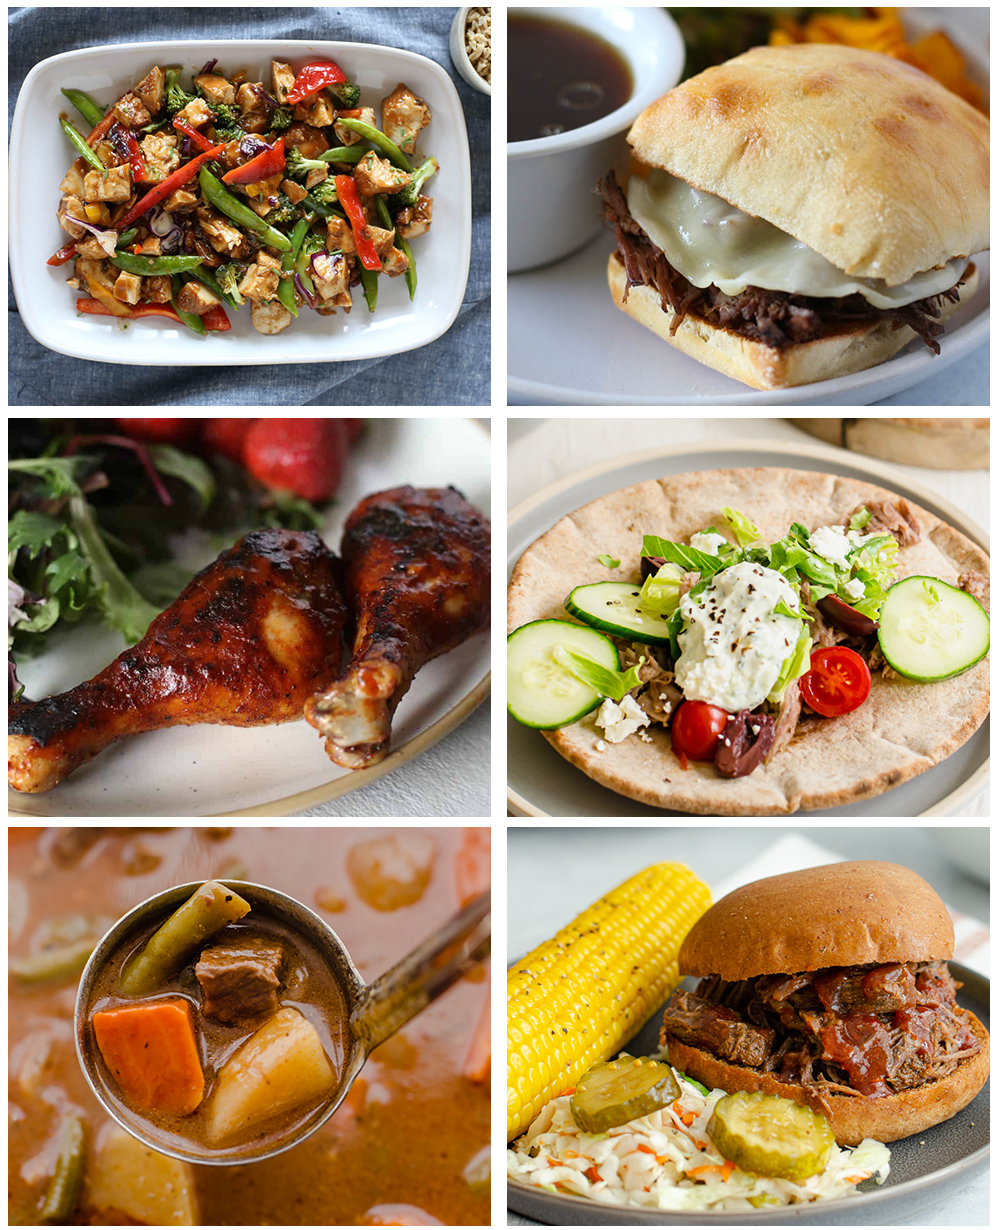 25 Dump and Go Slow Cooker Recipes - The Magical Slow Cooker